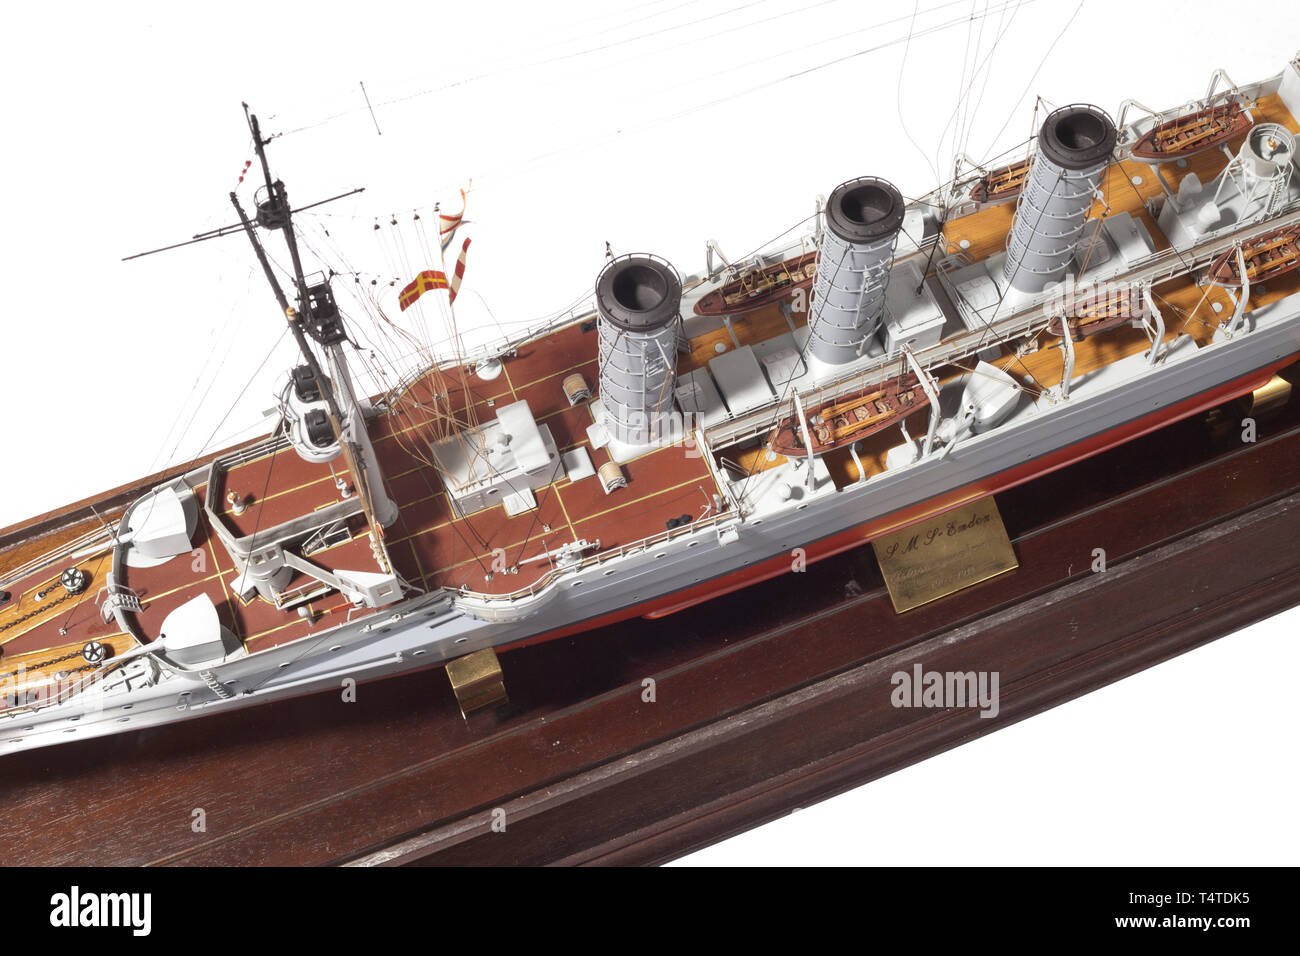 A model of SMS 'Emden', a light cruiser of the German Imperial Navy, Complete model in a scale of 1:100. Length 120 cm, width 13 cm, height 41 cm. Extremely detailed model of wood, plastic, and metal, of very high quality craftsmanship. The model is mounted on a specially built mahogany base under a Plexiglas cover. Length 132 cm, width 32 cm, height 133 cm. Commissioned in 1909 at the imperial dockyard in Danzig. Armed with ten 10.5 cm cannons, eight 5.2 cm cannons, two torpedo tubes. Engines delivered 16390 psi. After 1910, on foreign service i, Additional-Rights-Clearance-Info-Not-Available Stock Photo